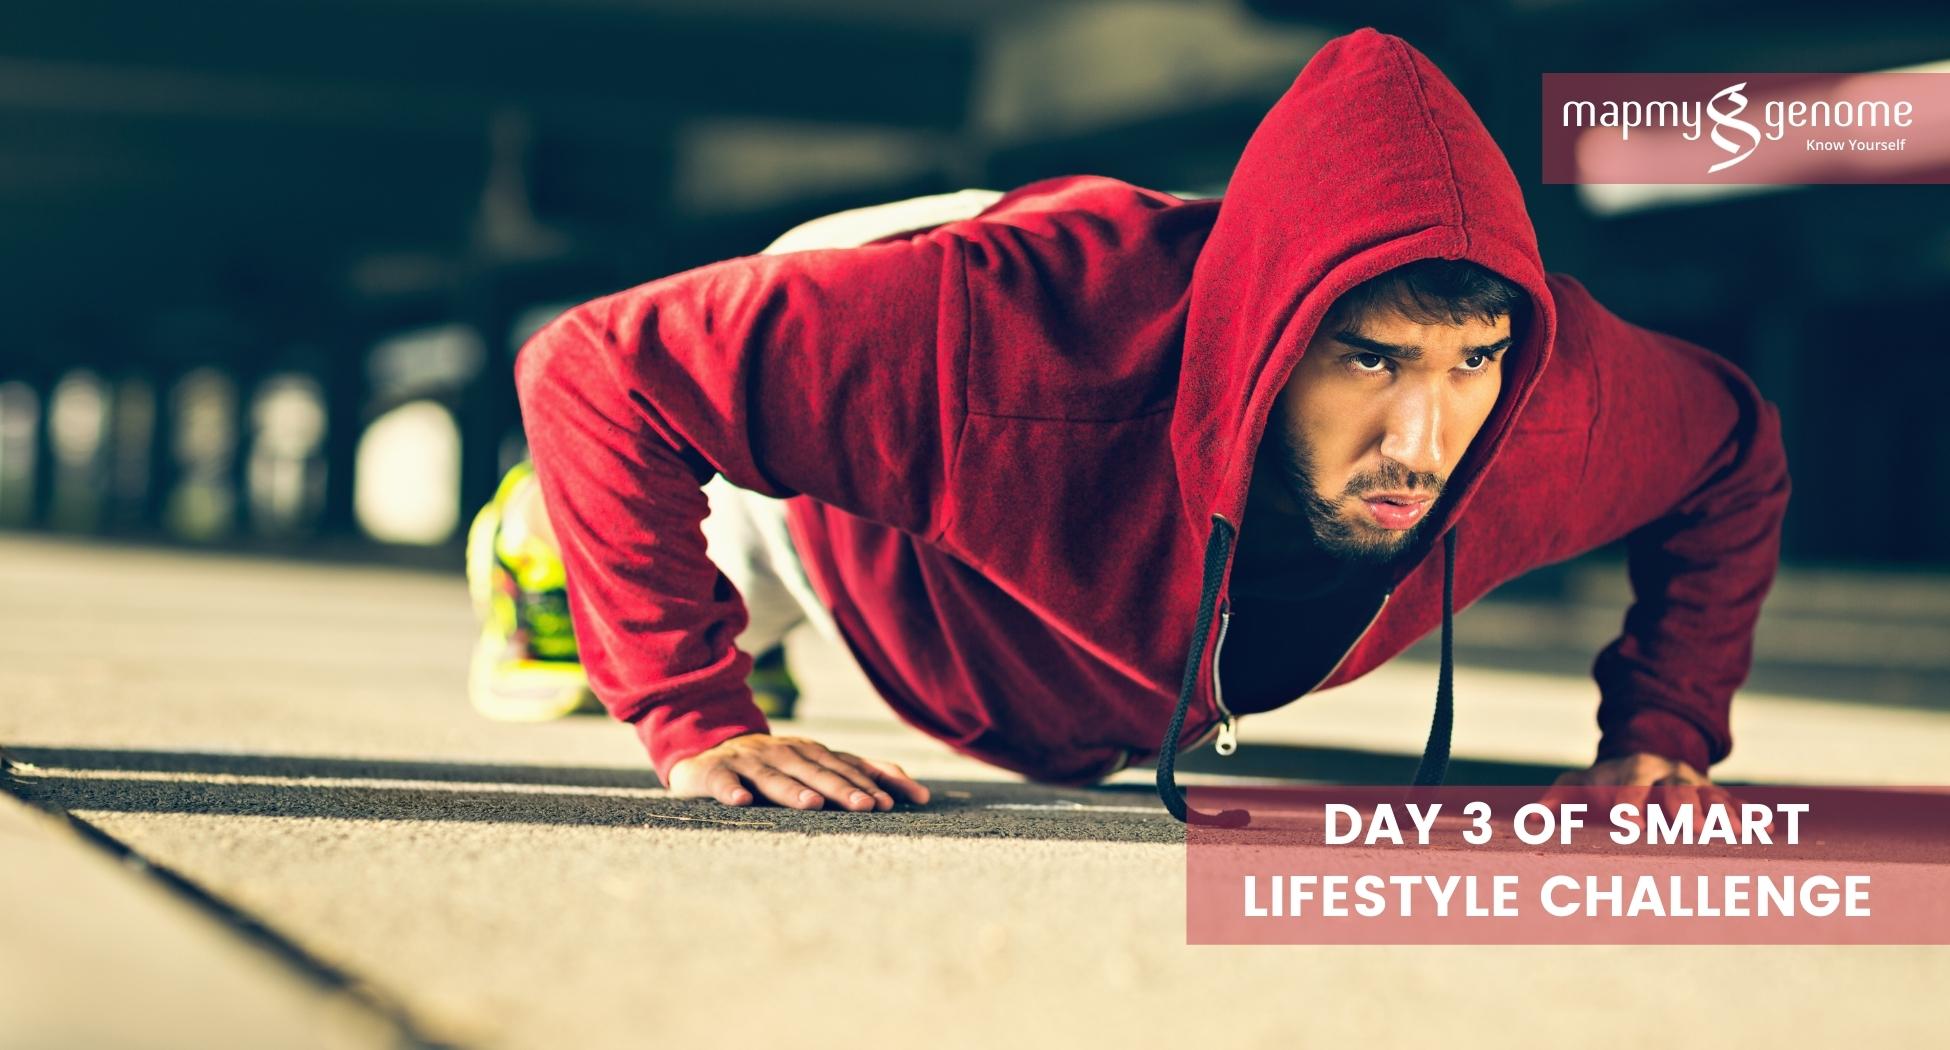 On Day 3 of Mapmygenome SMART Lifestyle Challenge, we are going to step up the intensity of exercises a little bit.